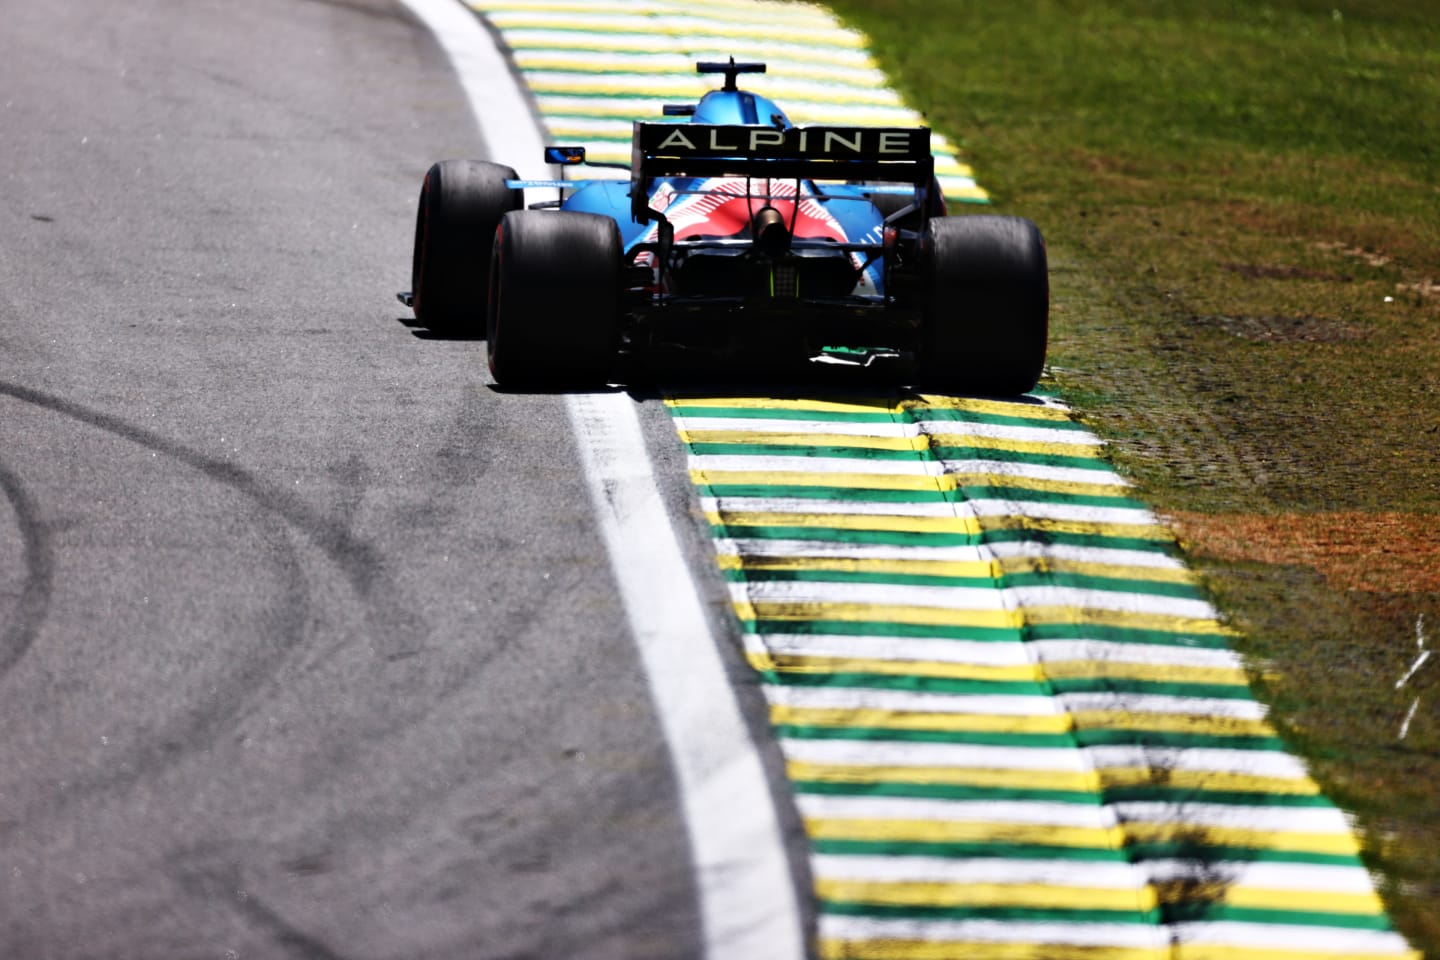 SAO PAULO, BRAZIL - NOVEMBER 13: Fernando Alonso of Spain driving the (14) Alpine A521 Renault during practice ahead of the F1 Grand Prix of Brazil at Autodromo Jose Carlos Pace on November 13, 2021 in Sao Paulo, Brazil. (Photo by Mark Thompson/Getty Images)